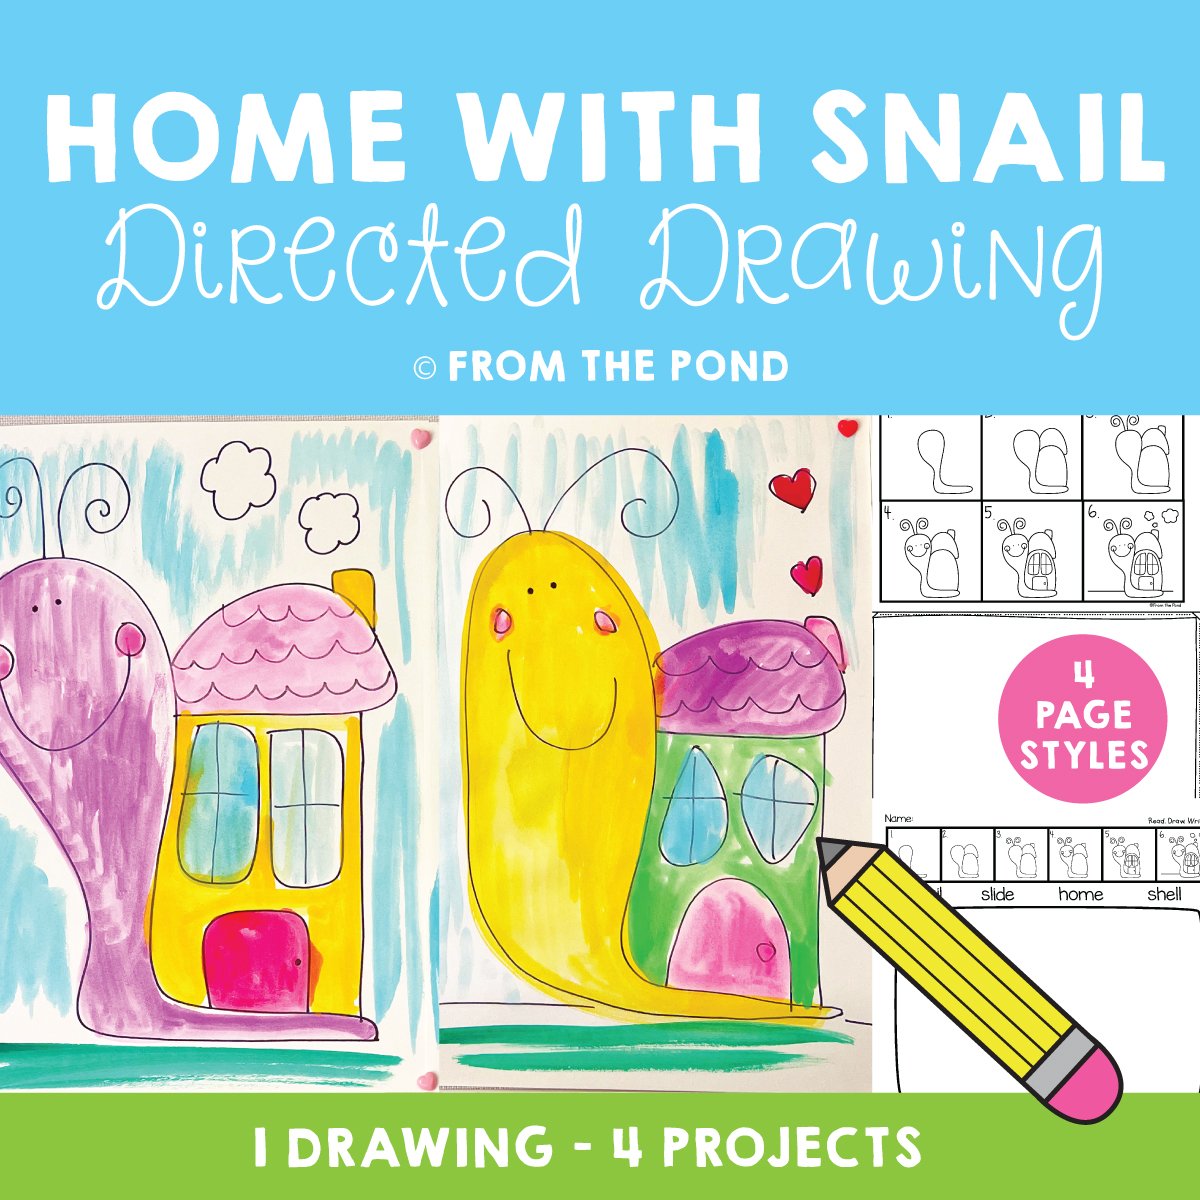 Snail Home Drawing